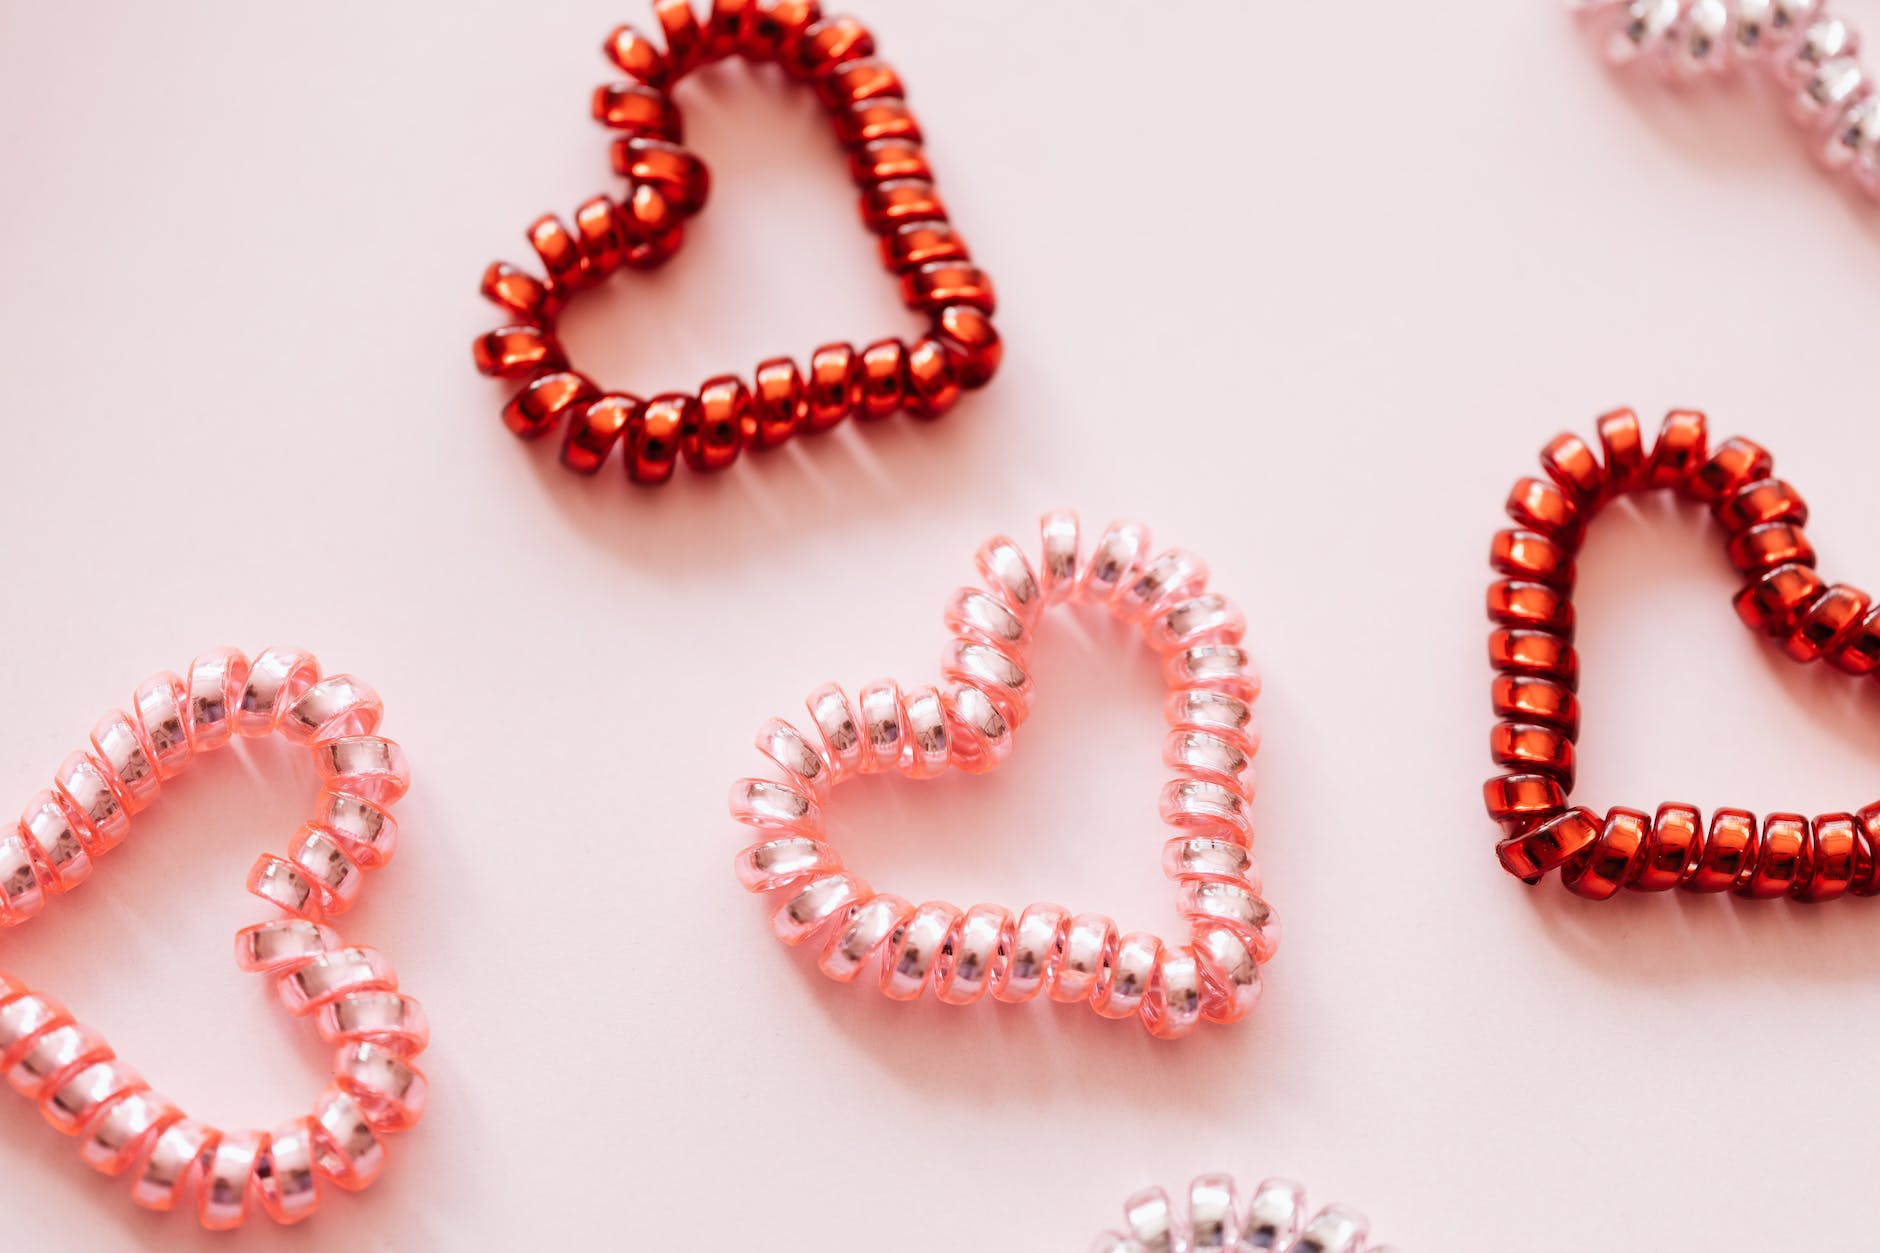 colorful hair ties in shape of hearts on pink surface